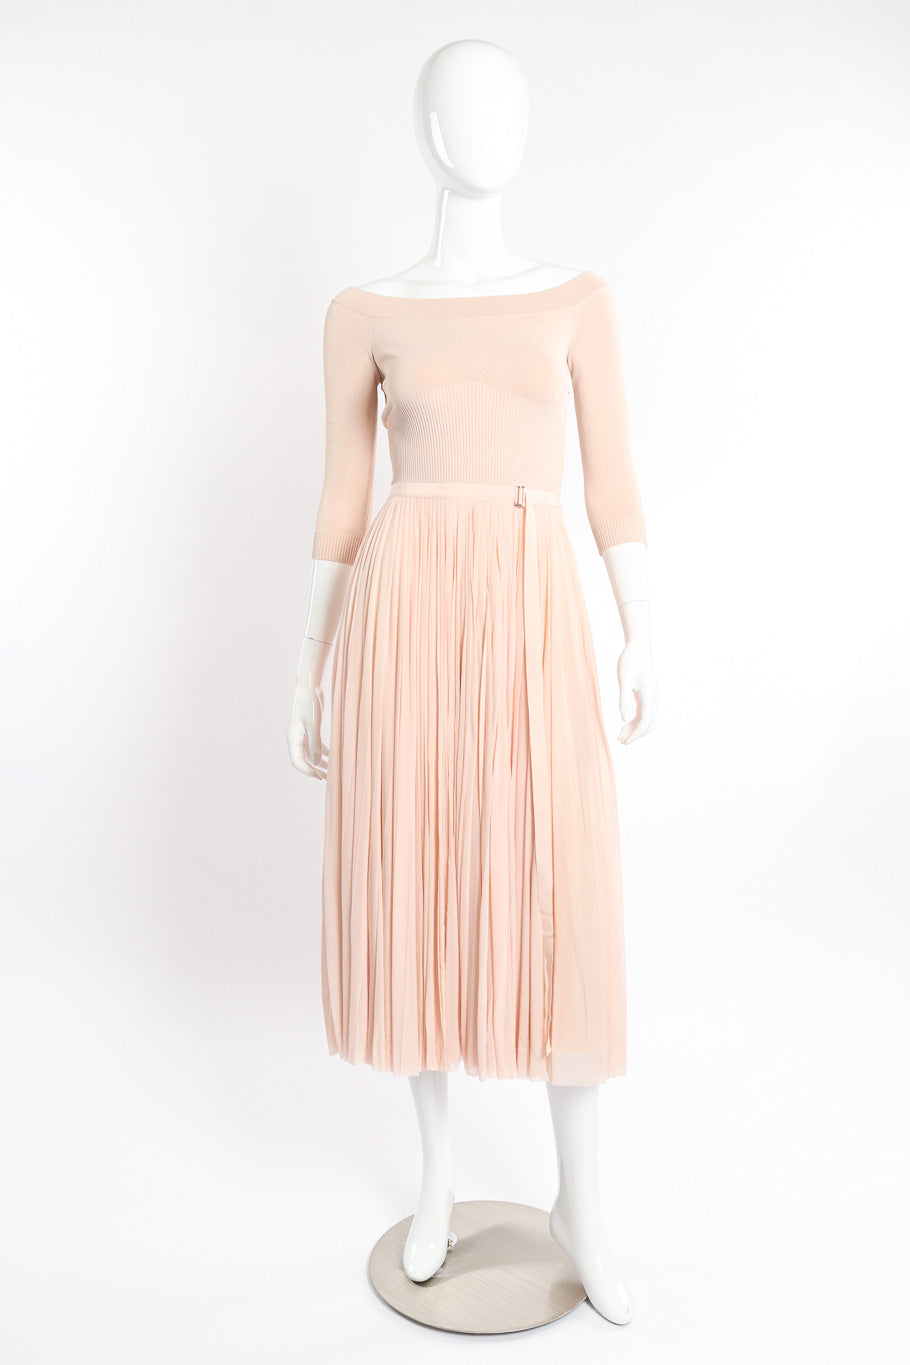 Alexander McQueen Off-The-Shoulder Pleated Knit Dress front view on mannequin @recessla